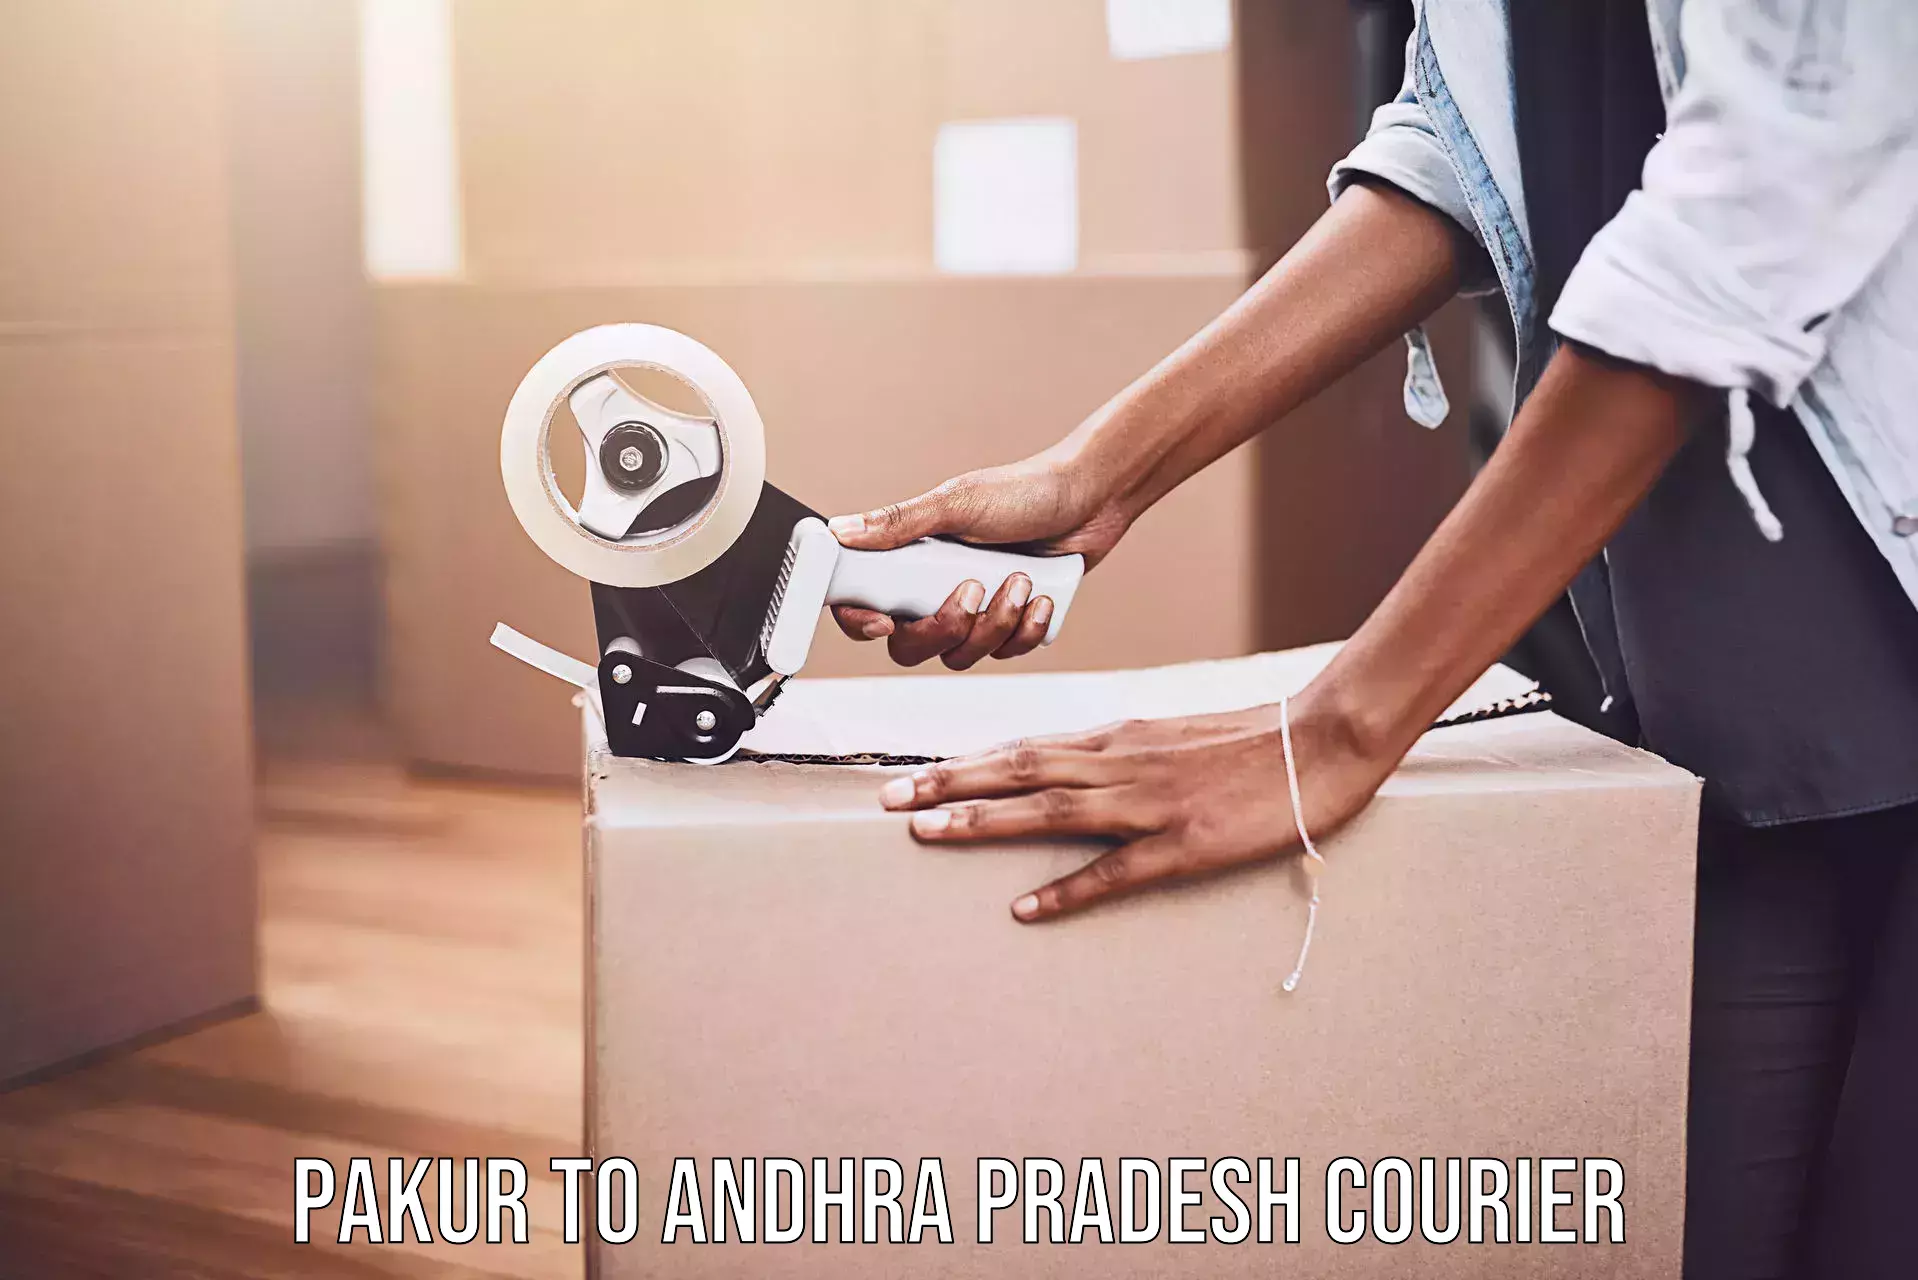 On-call courier service Pakur to Palakollu